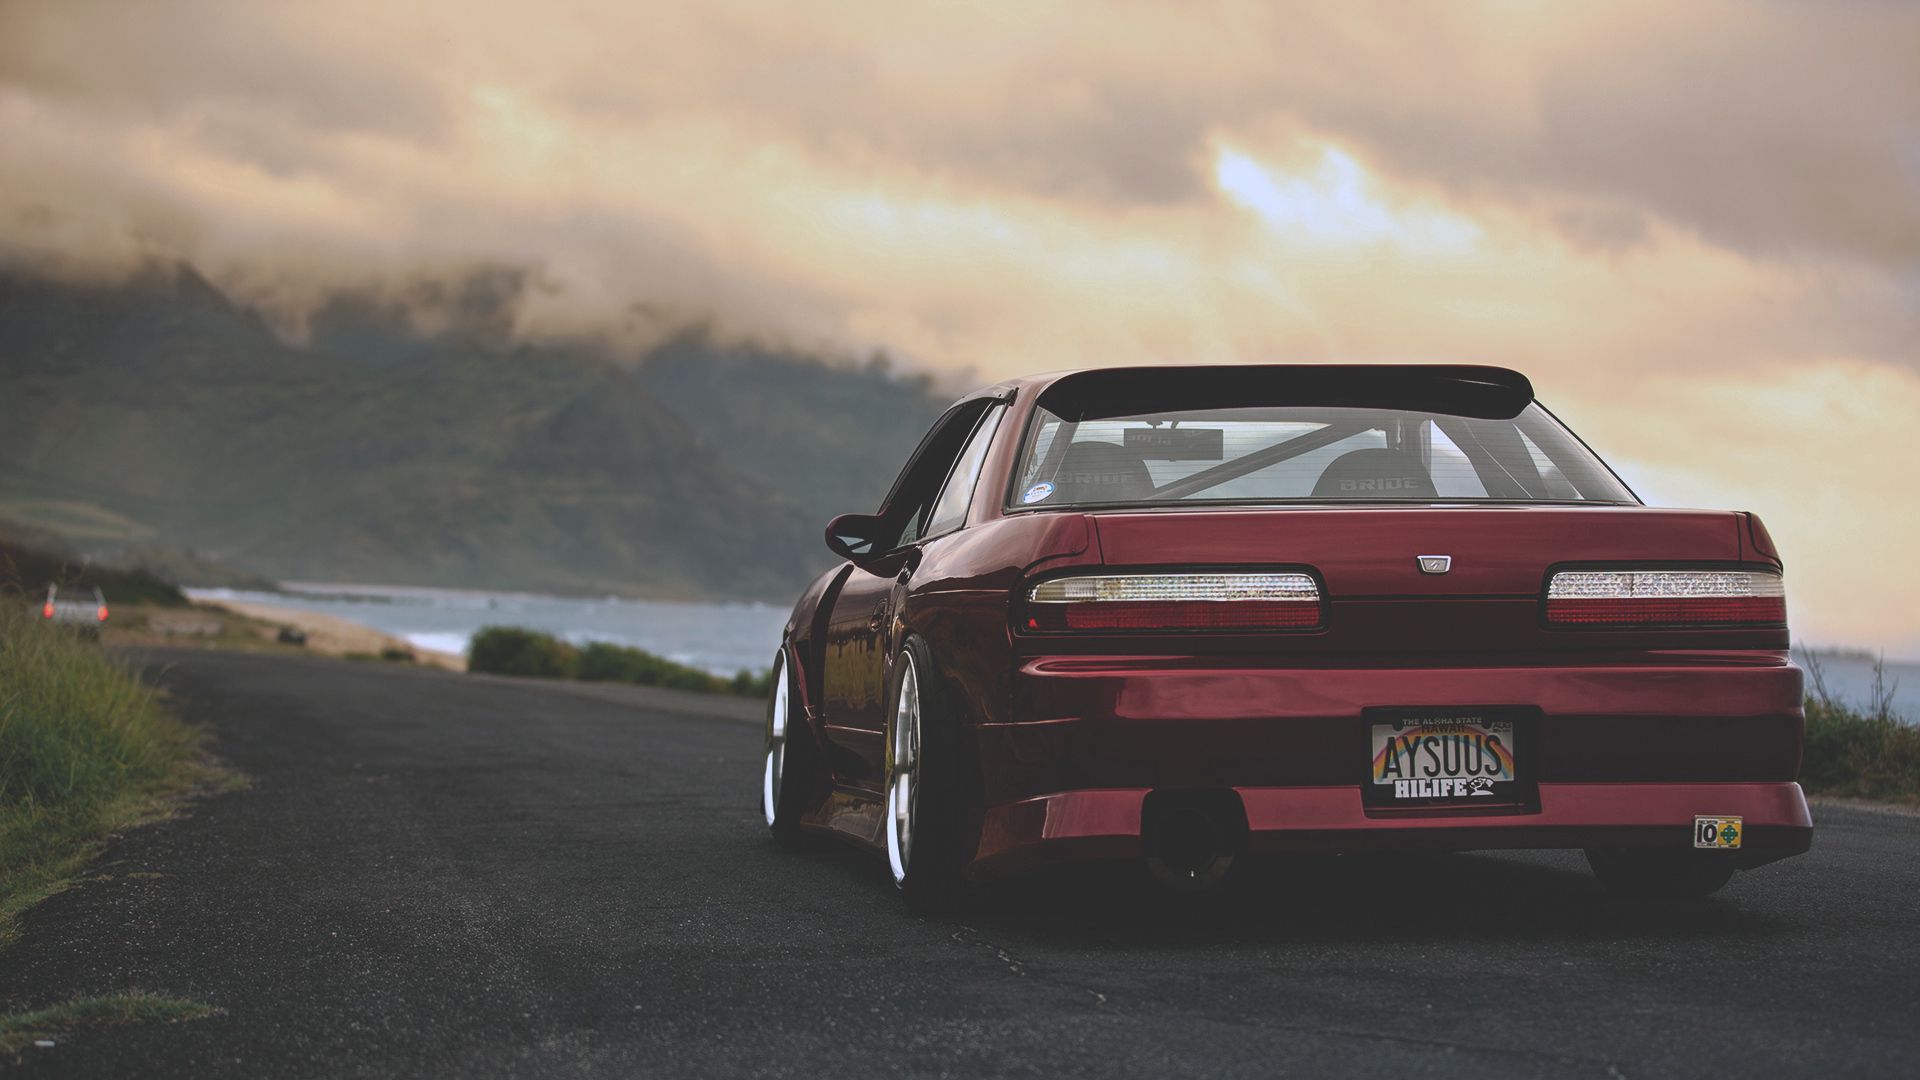 95710 download wallpaper nissan, cars, red, back view, rear view, silvia screensavers and pictures for free